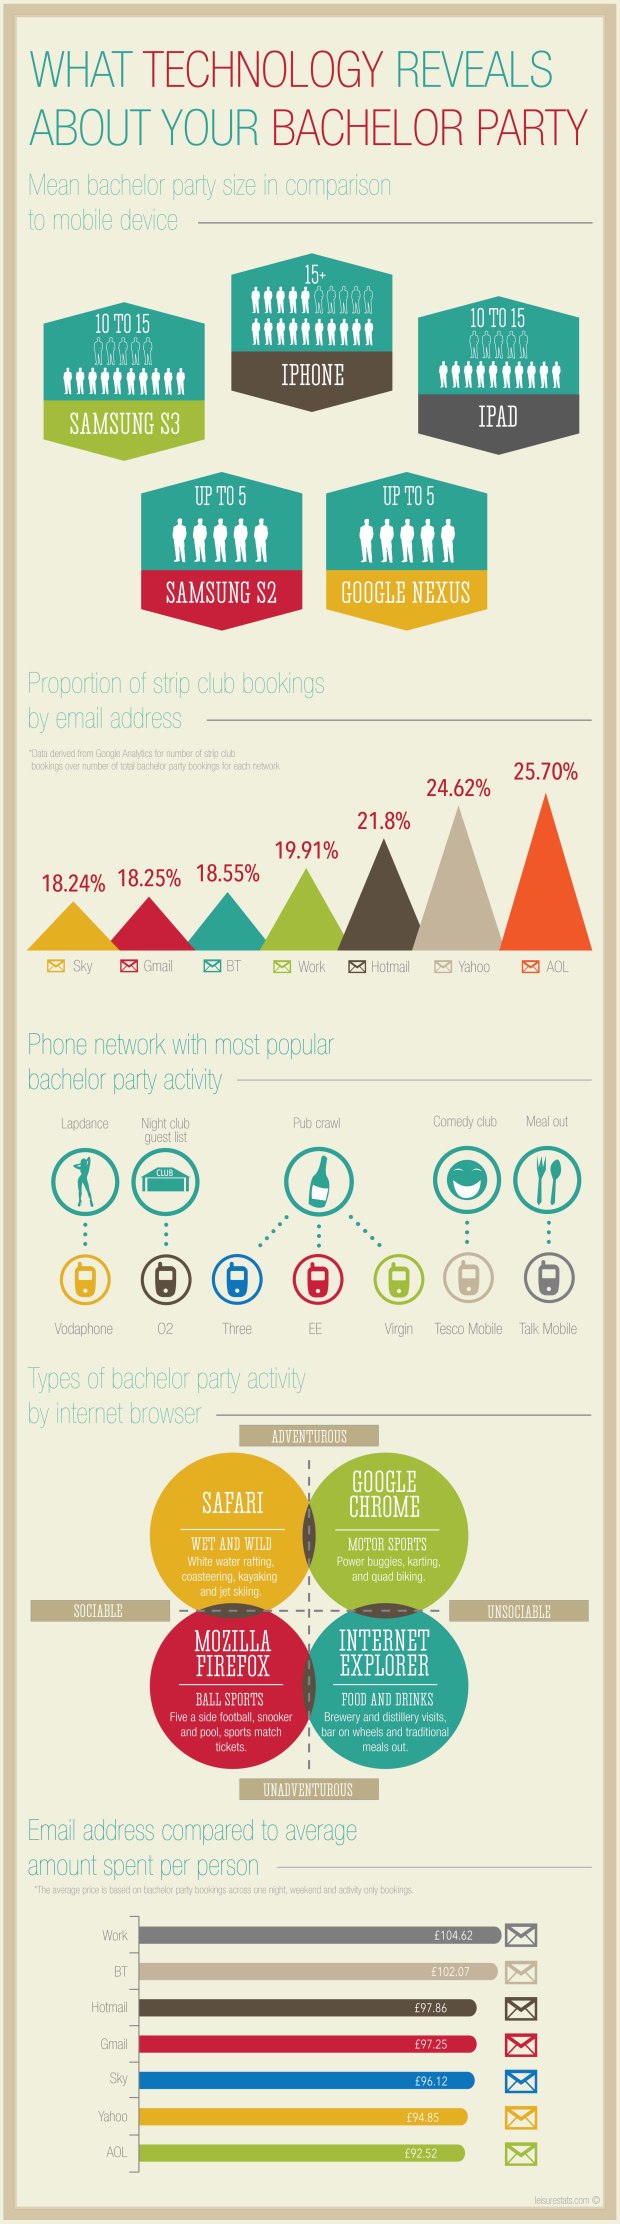 Infographic -What Technology Reveals About Your Bachelor Party